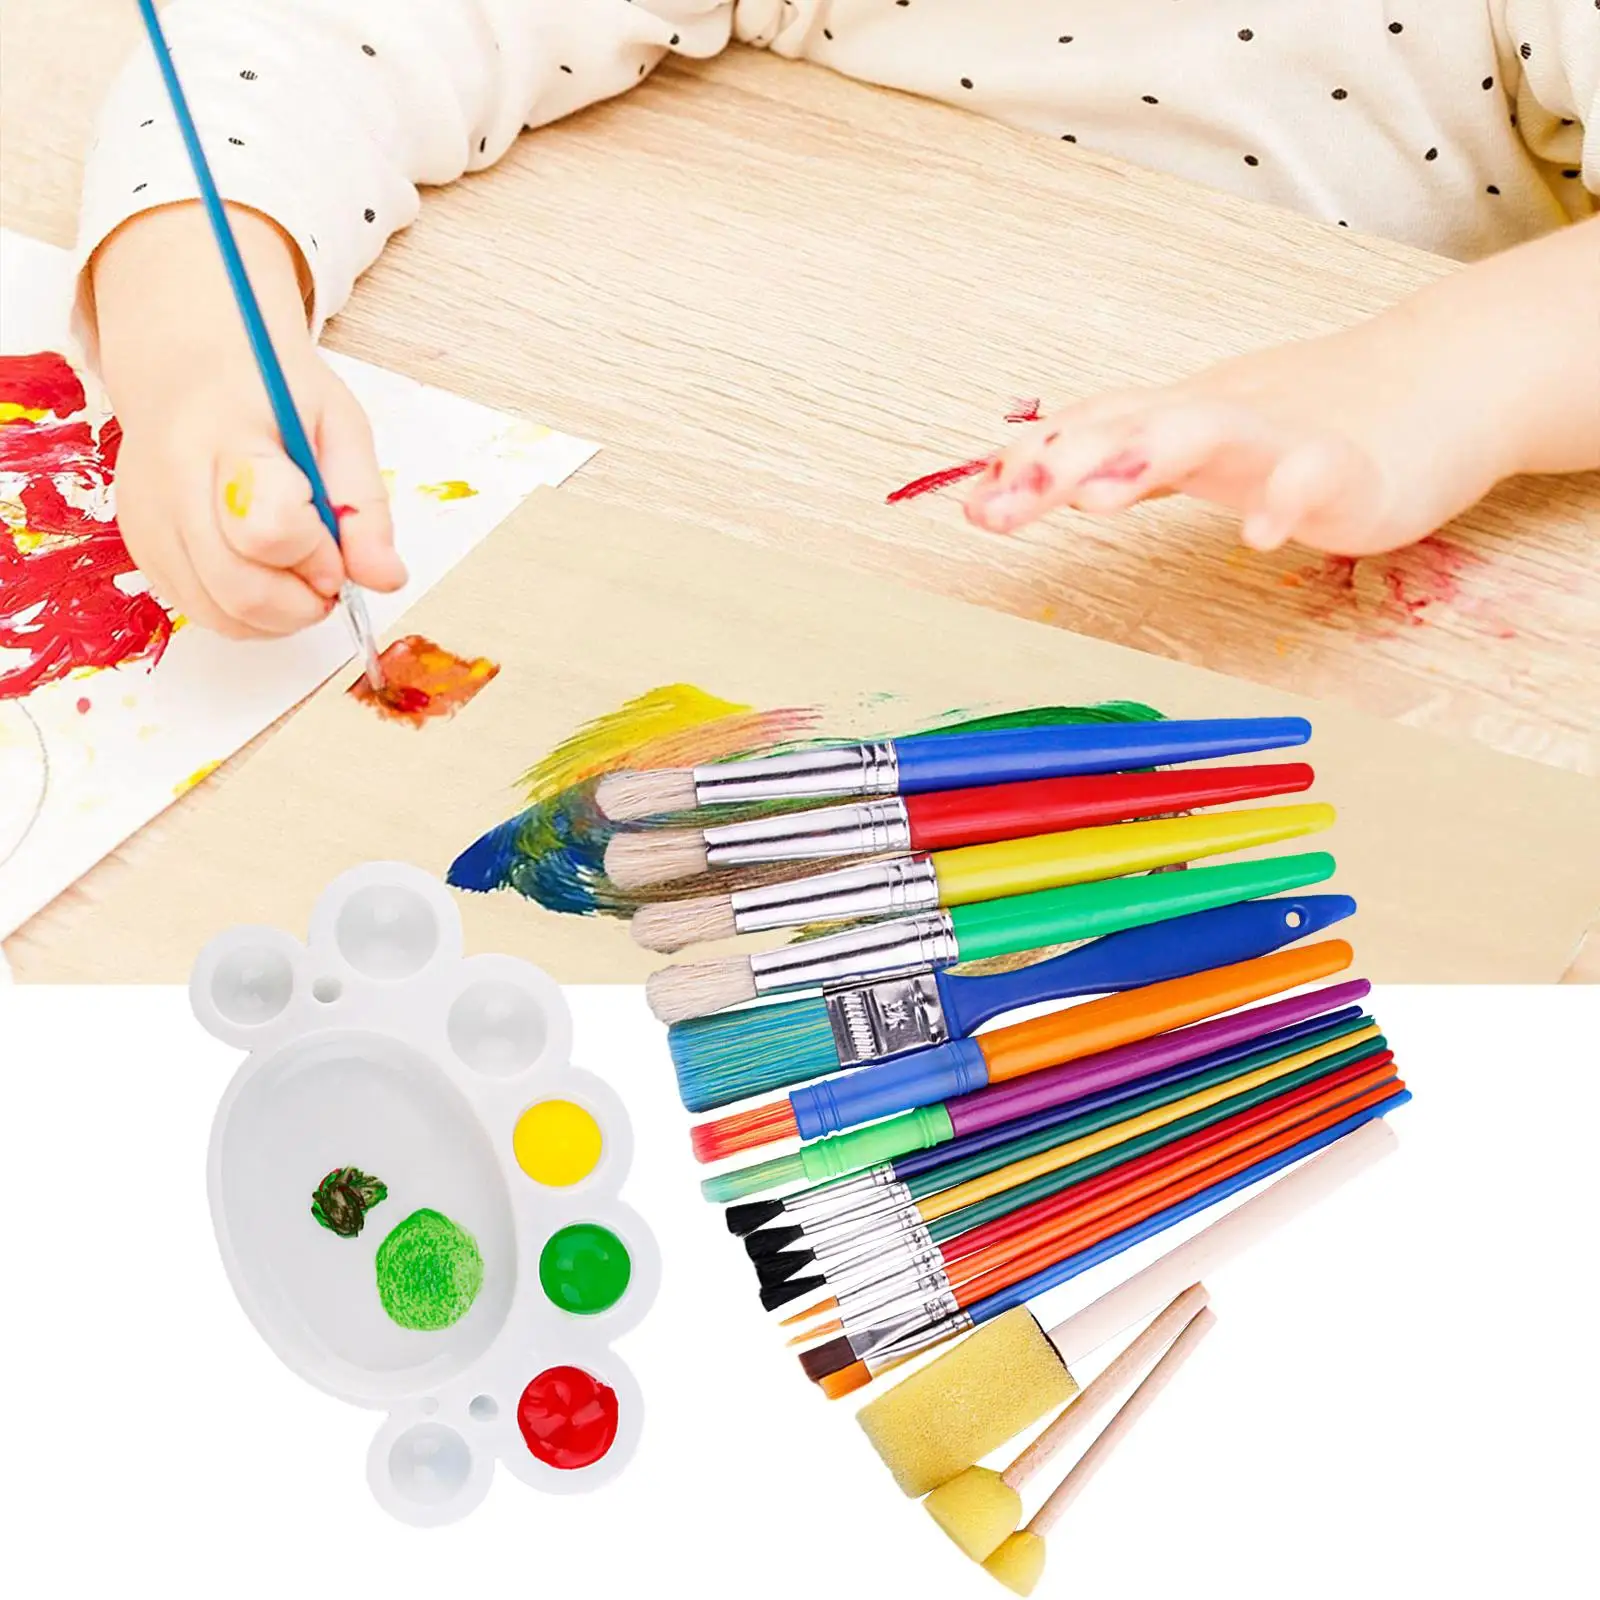 19 Pieces Paint Brush Set Watercolor Kids Adults Drawing Accessories Practical Boys and Girls Professionals Painting Brushes